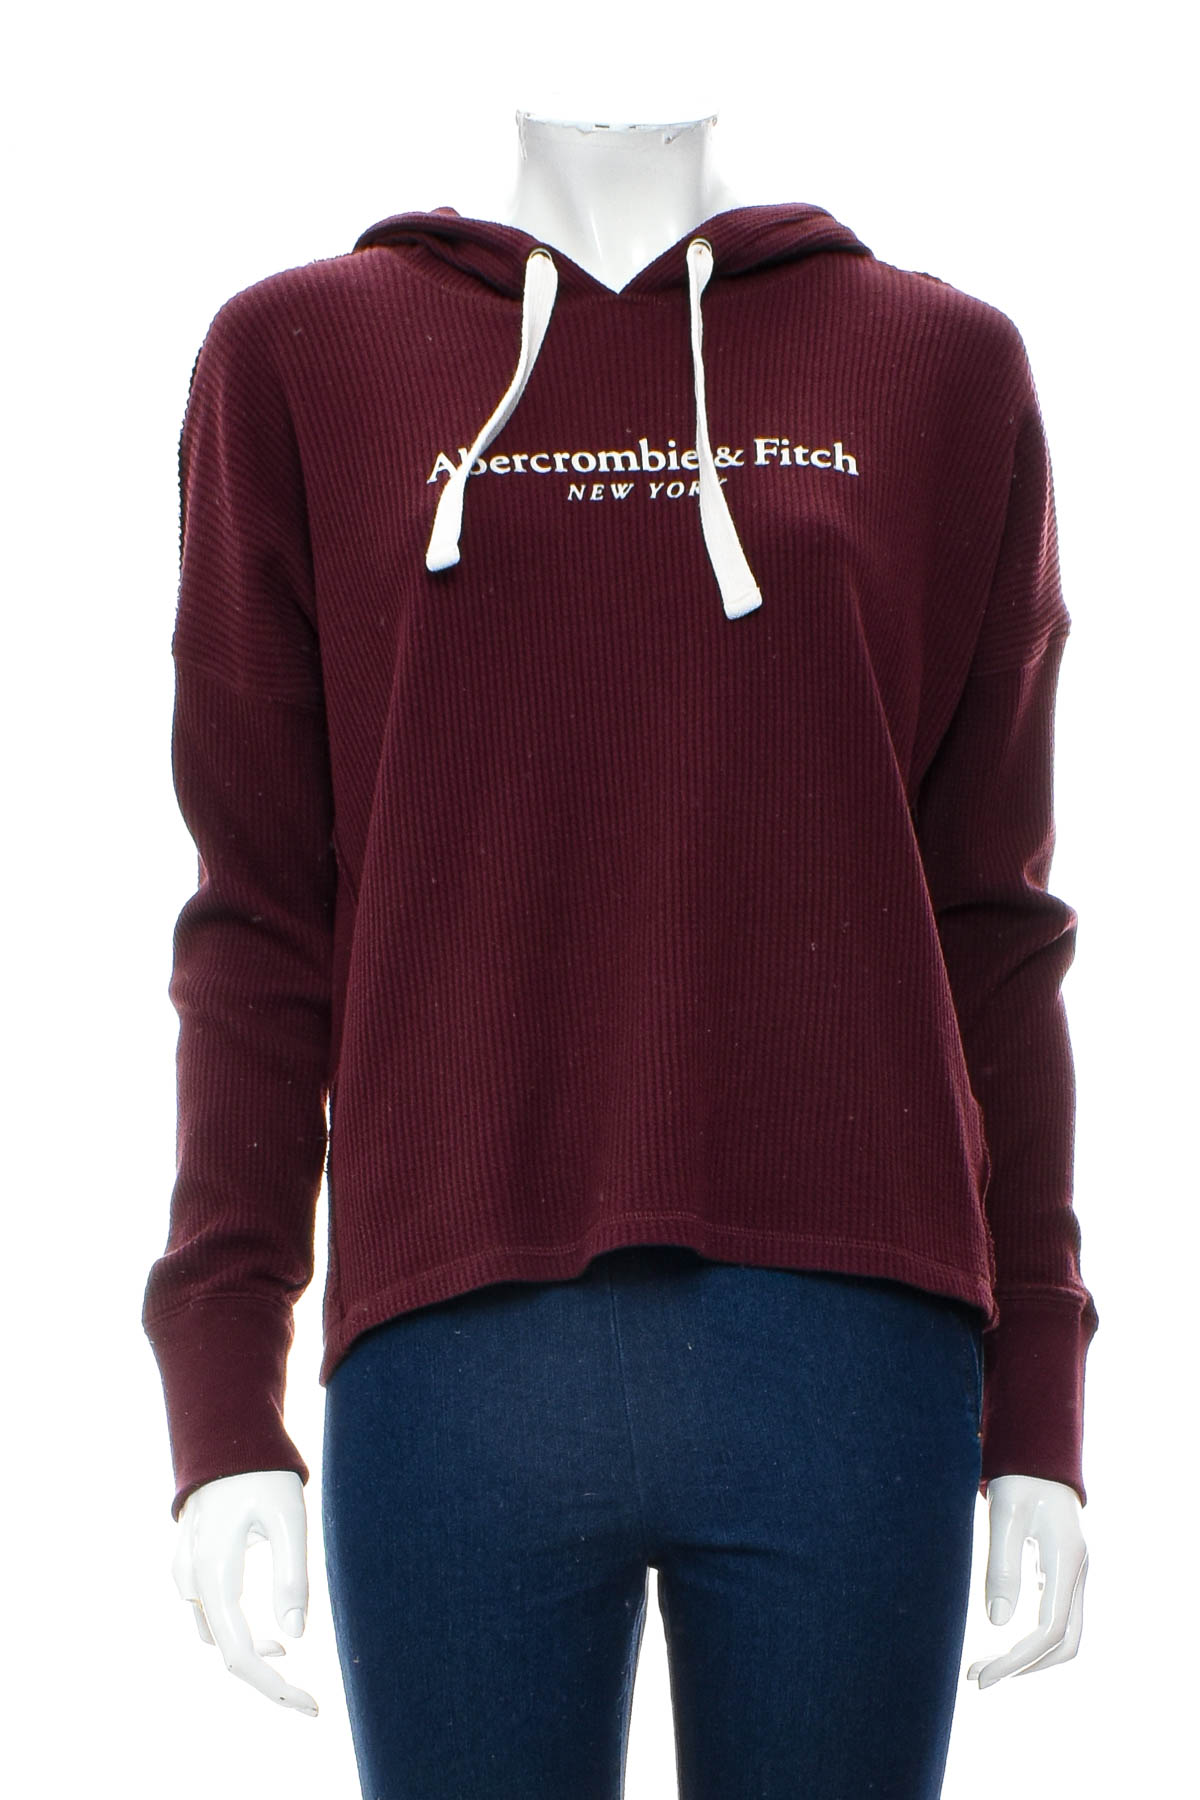 Women's sweater - Abercrombie & Fitch - 0